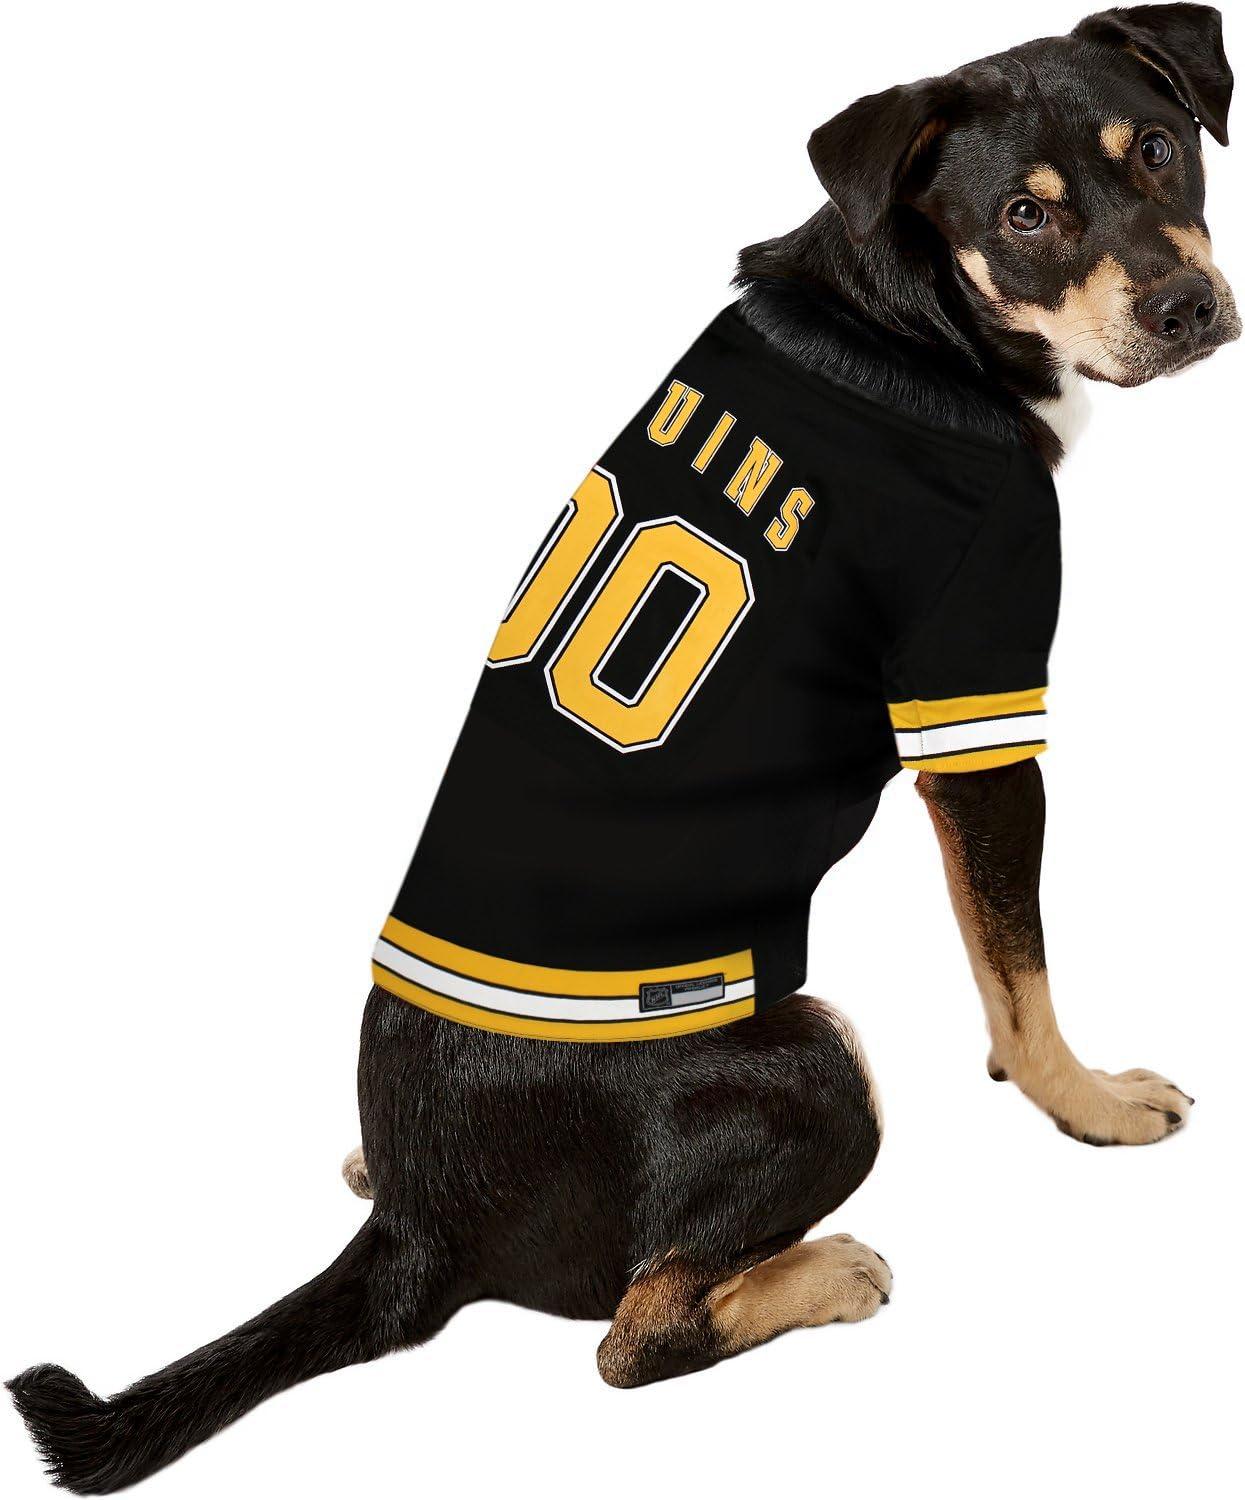 NHL Boston Bruins Jersey for Dogs & Cats, Small. - Let Your Pet Be A Real  NHL Fan! Small Boston Bruins